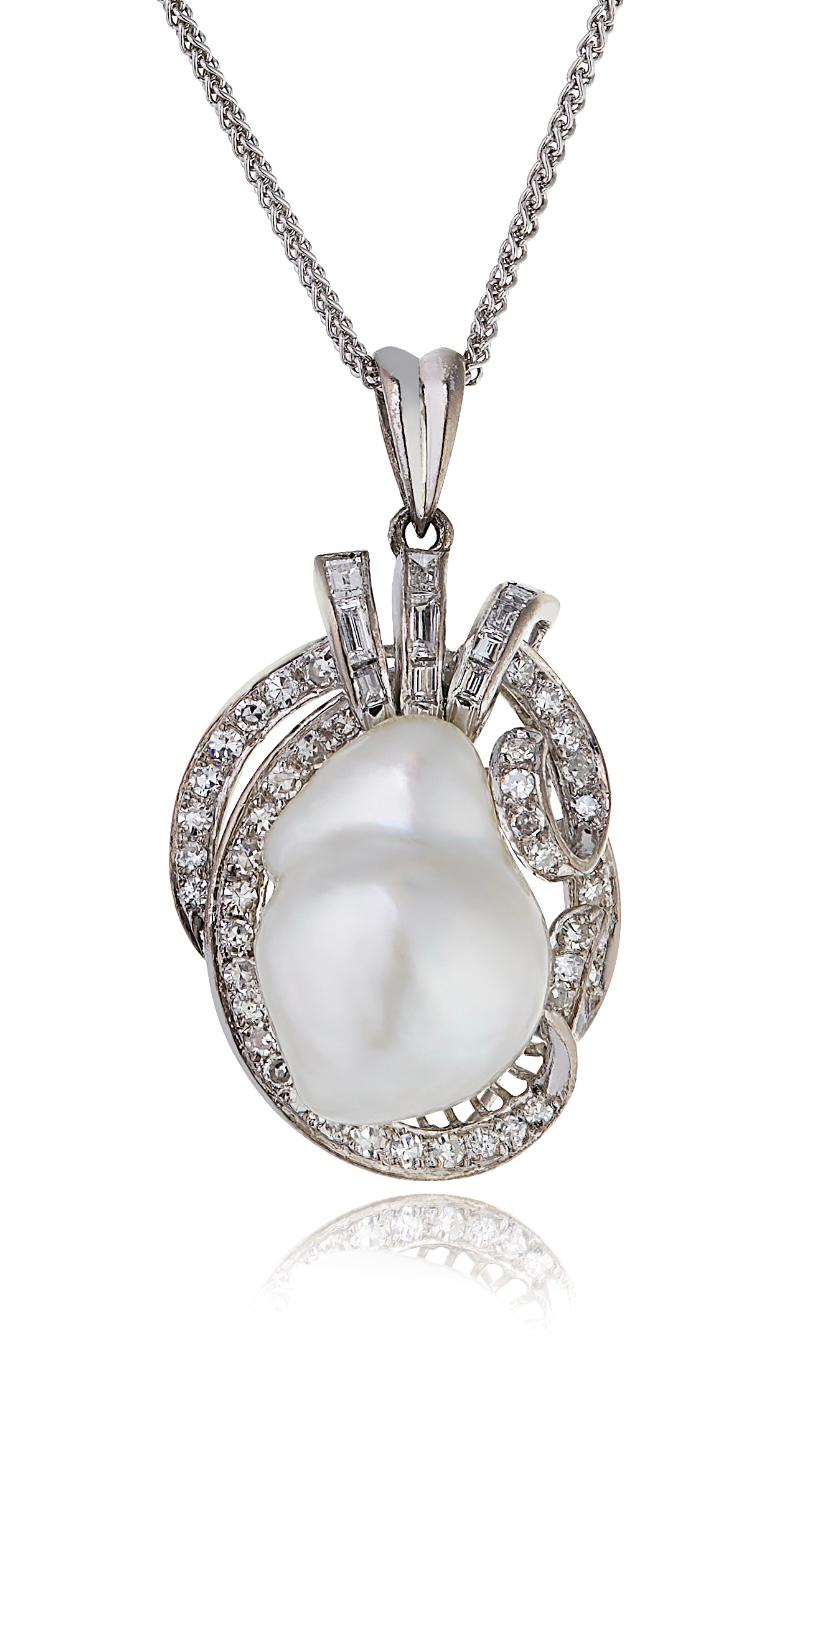 E Wolfe & Company Baroque Pearl and Diamond Pendant in 14 Carat White gold. The baroque cultured pearl has been mounted in an antique style with a mixture of baguette and round brilliant cut diamonds around it. The diamonds have a total weight of